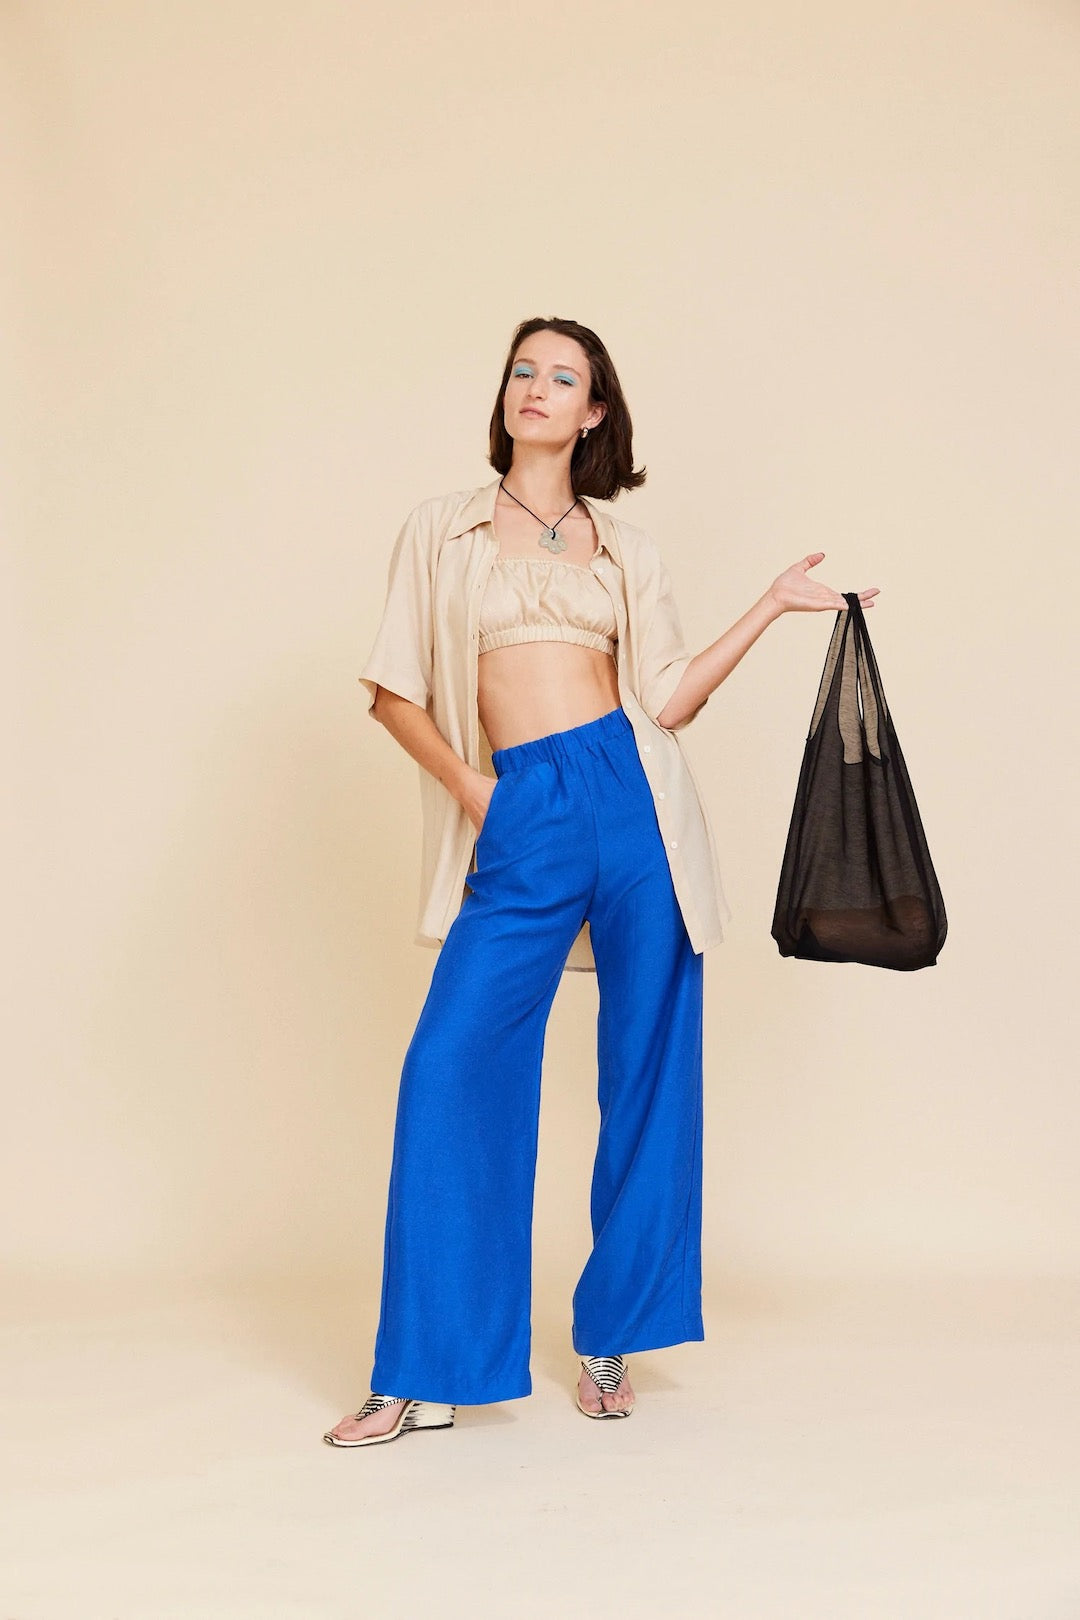 A woman in blue wide leg pants holding a Wander Bag – Onyx shopping bag from OVNA OVICH.